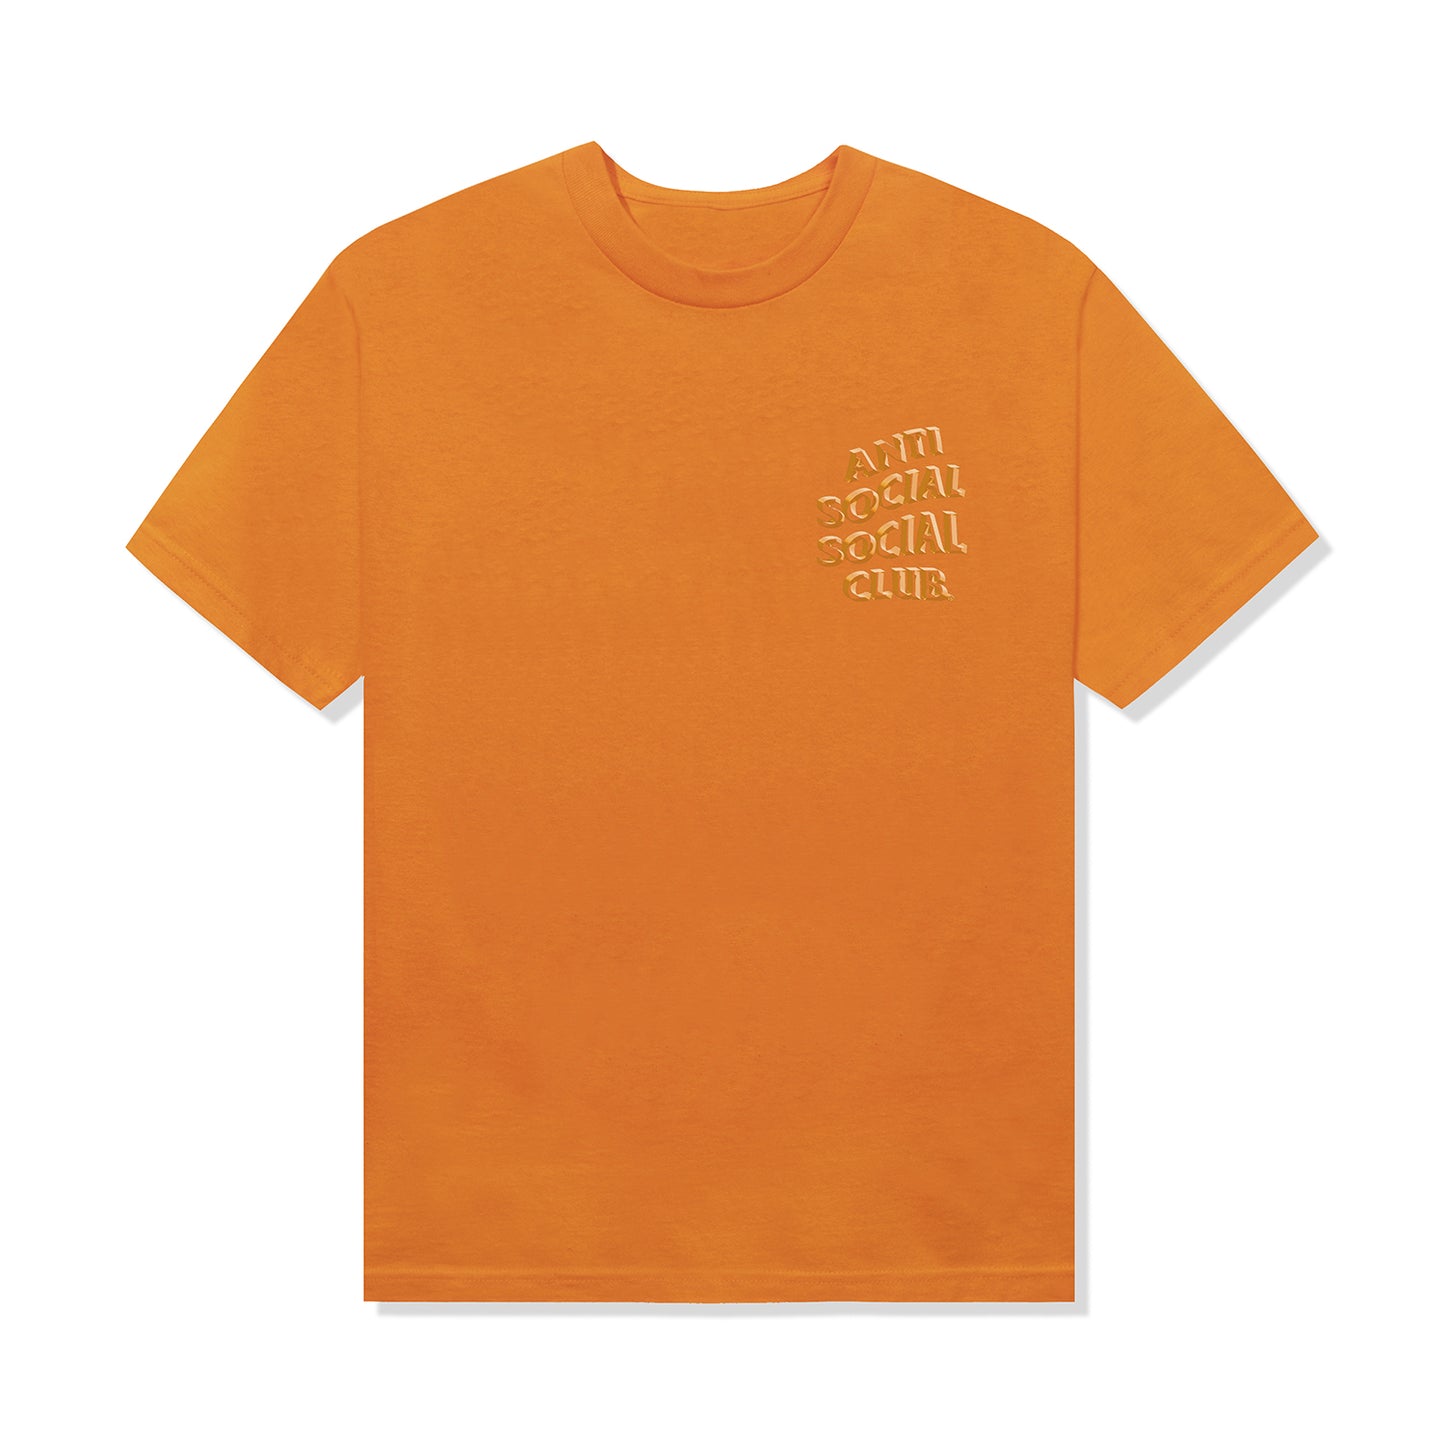 Orange sherbet tee, small ASSC graphic, front